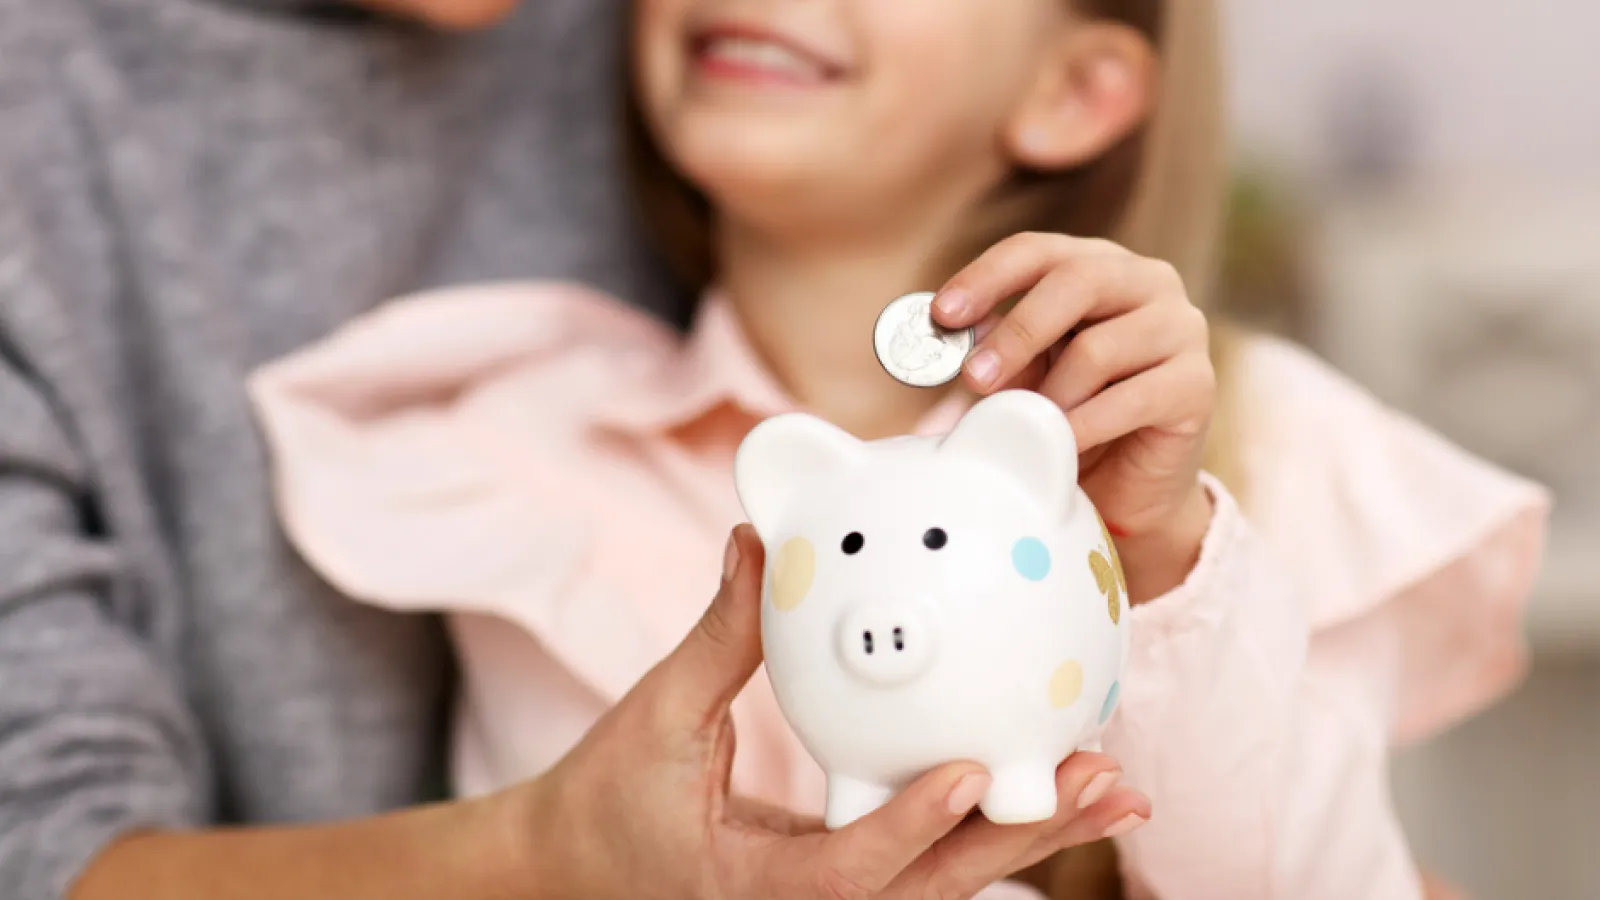 How-To: Get Your Kids Interested in Money